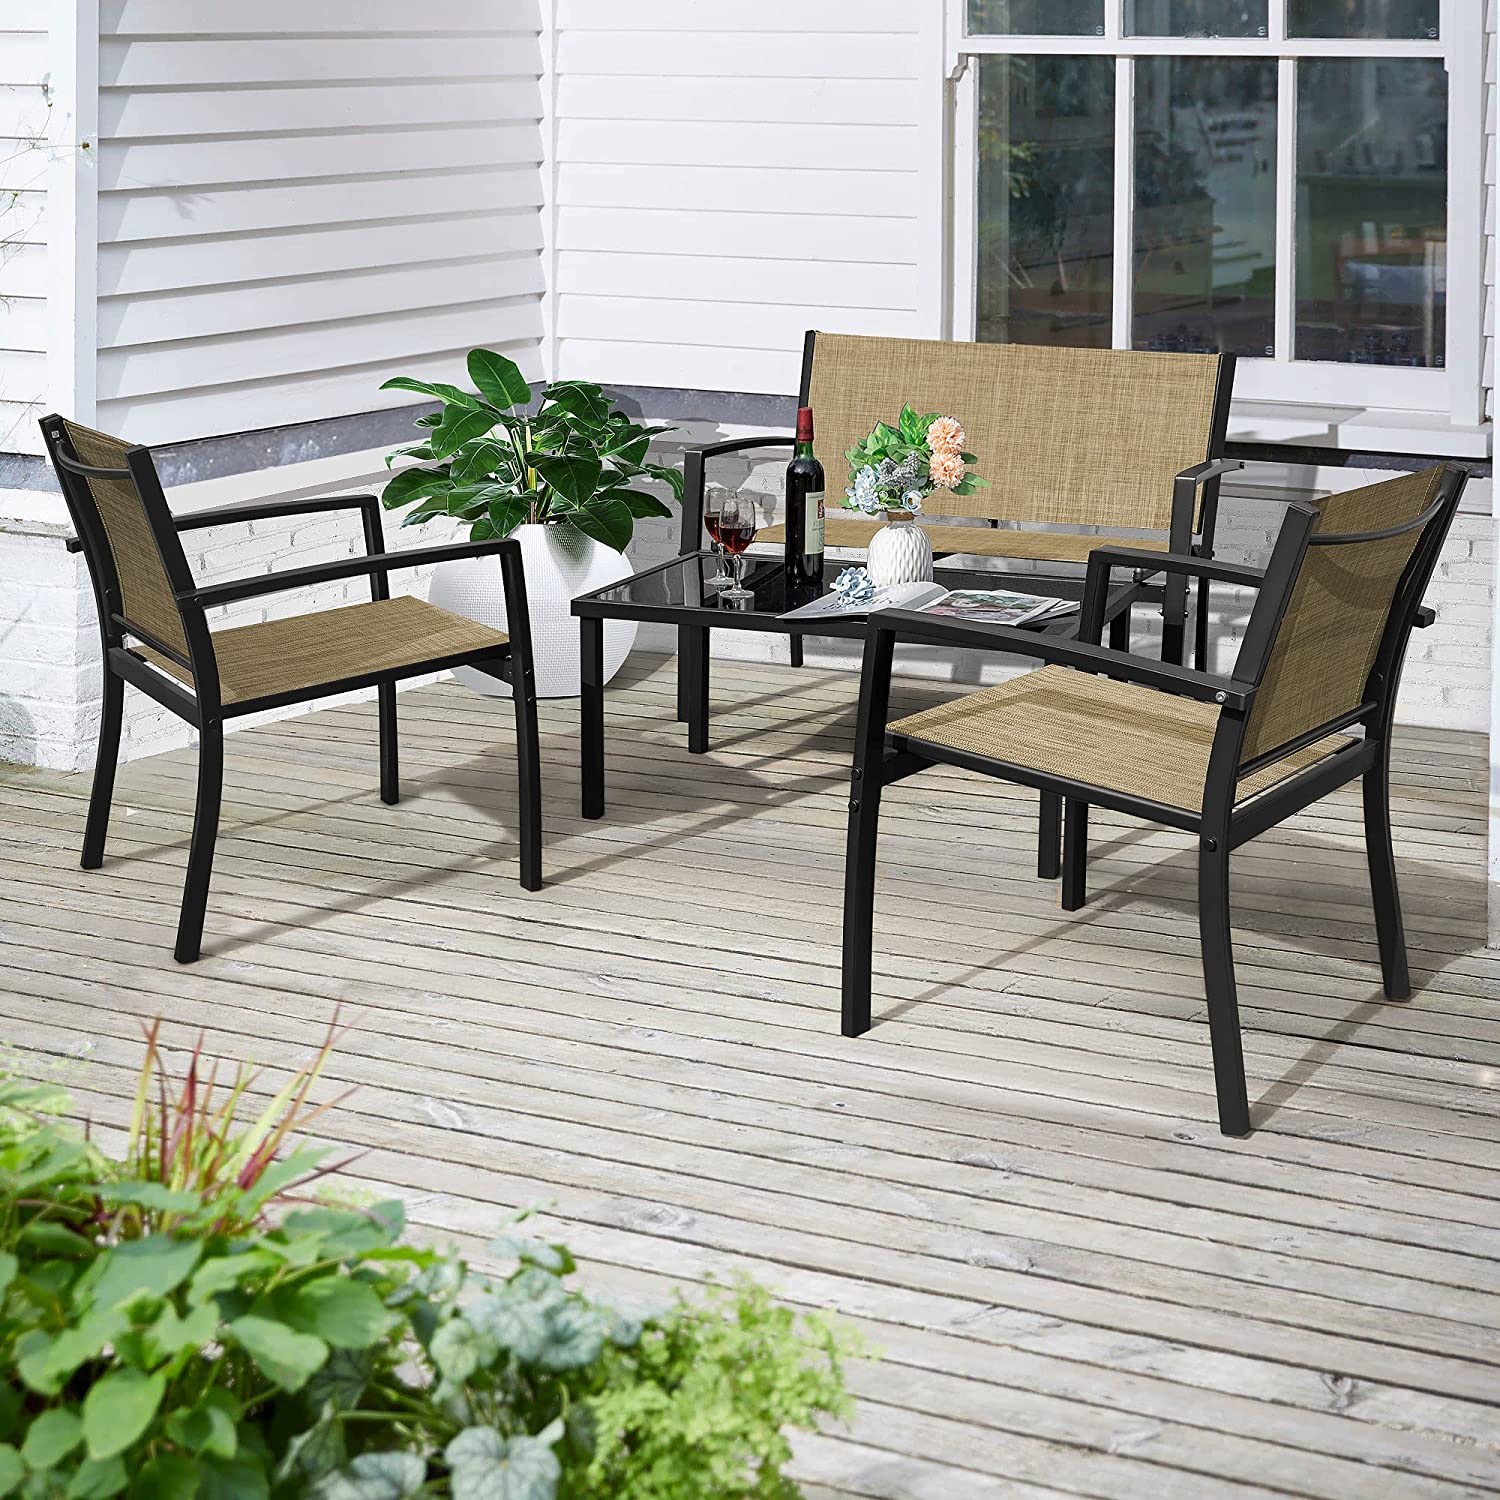 ZXNYH 4 Pieces Patio Furniture Set Modern Patio Conversation Sets Textilene Outdoor Furniture Patio Chairs Set of 4 with Loveseat Coffee Table for Porch Lawn Pool and Balcony (Black) - image 2 of 7